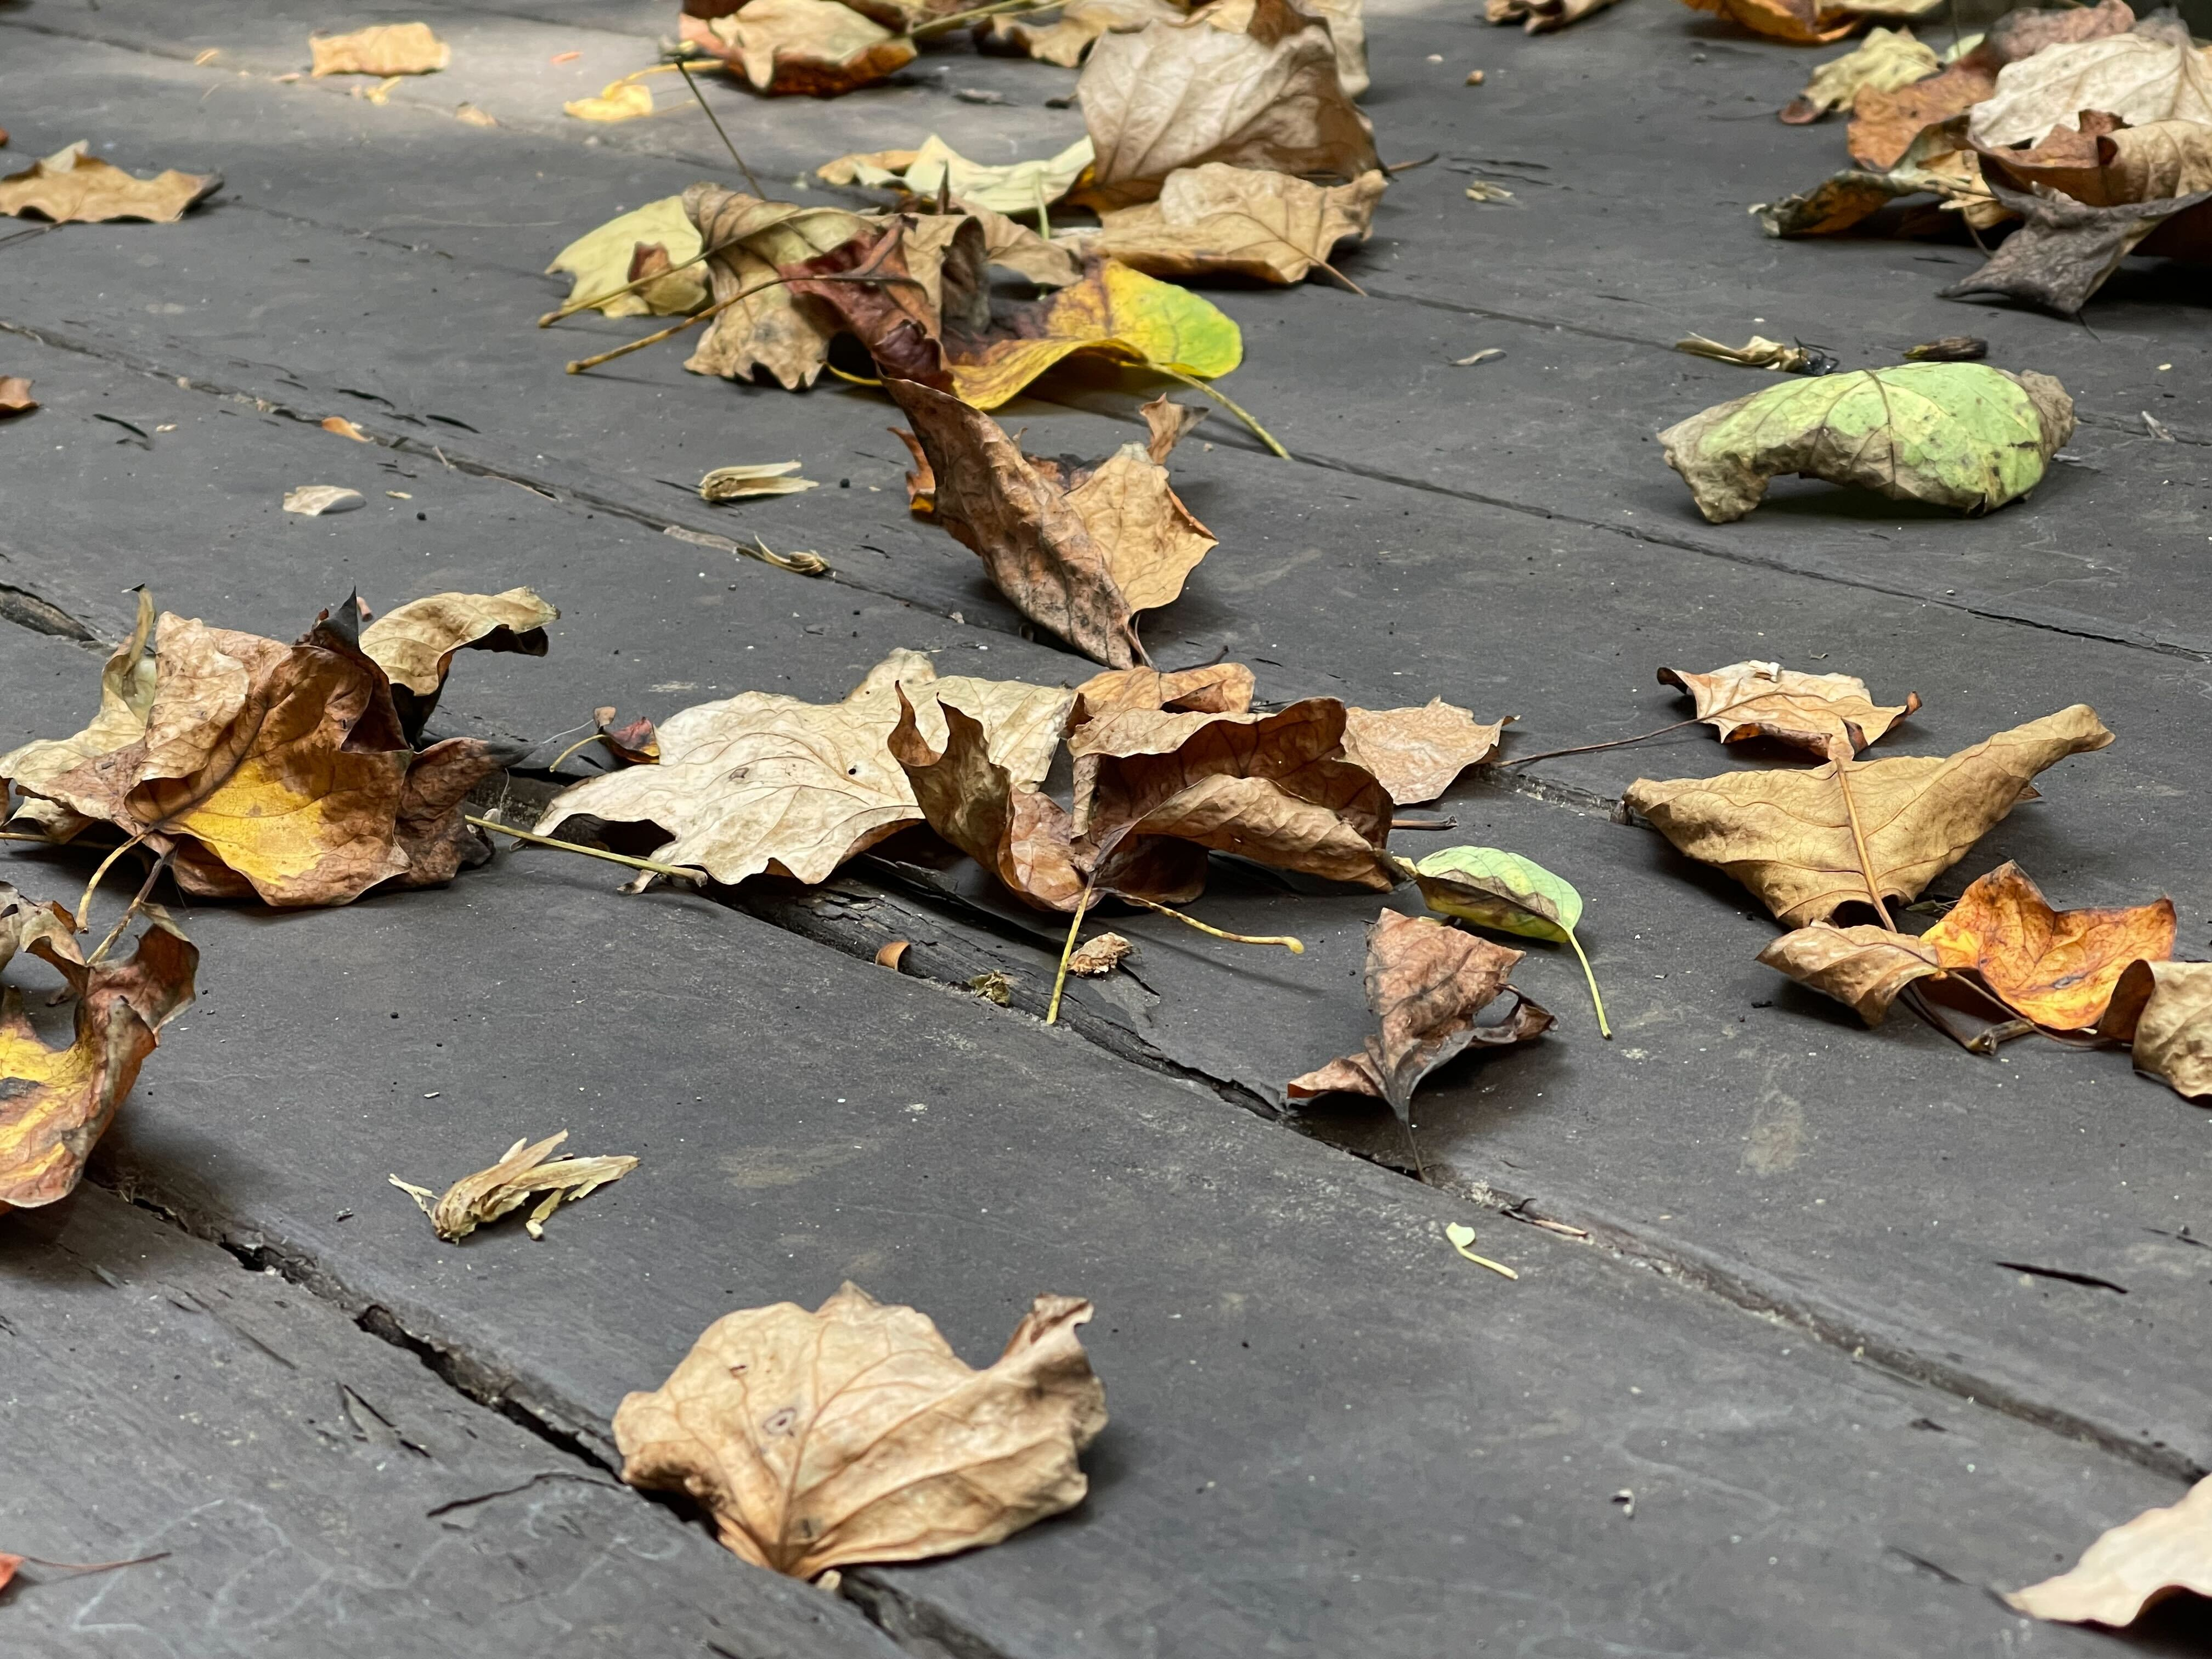 We're still in the dog days of summer, but trees are shedding leaves like it's the fall